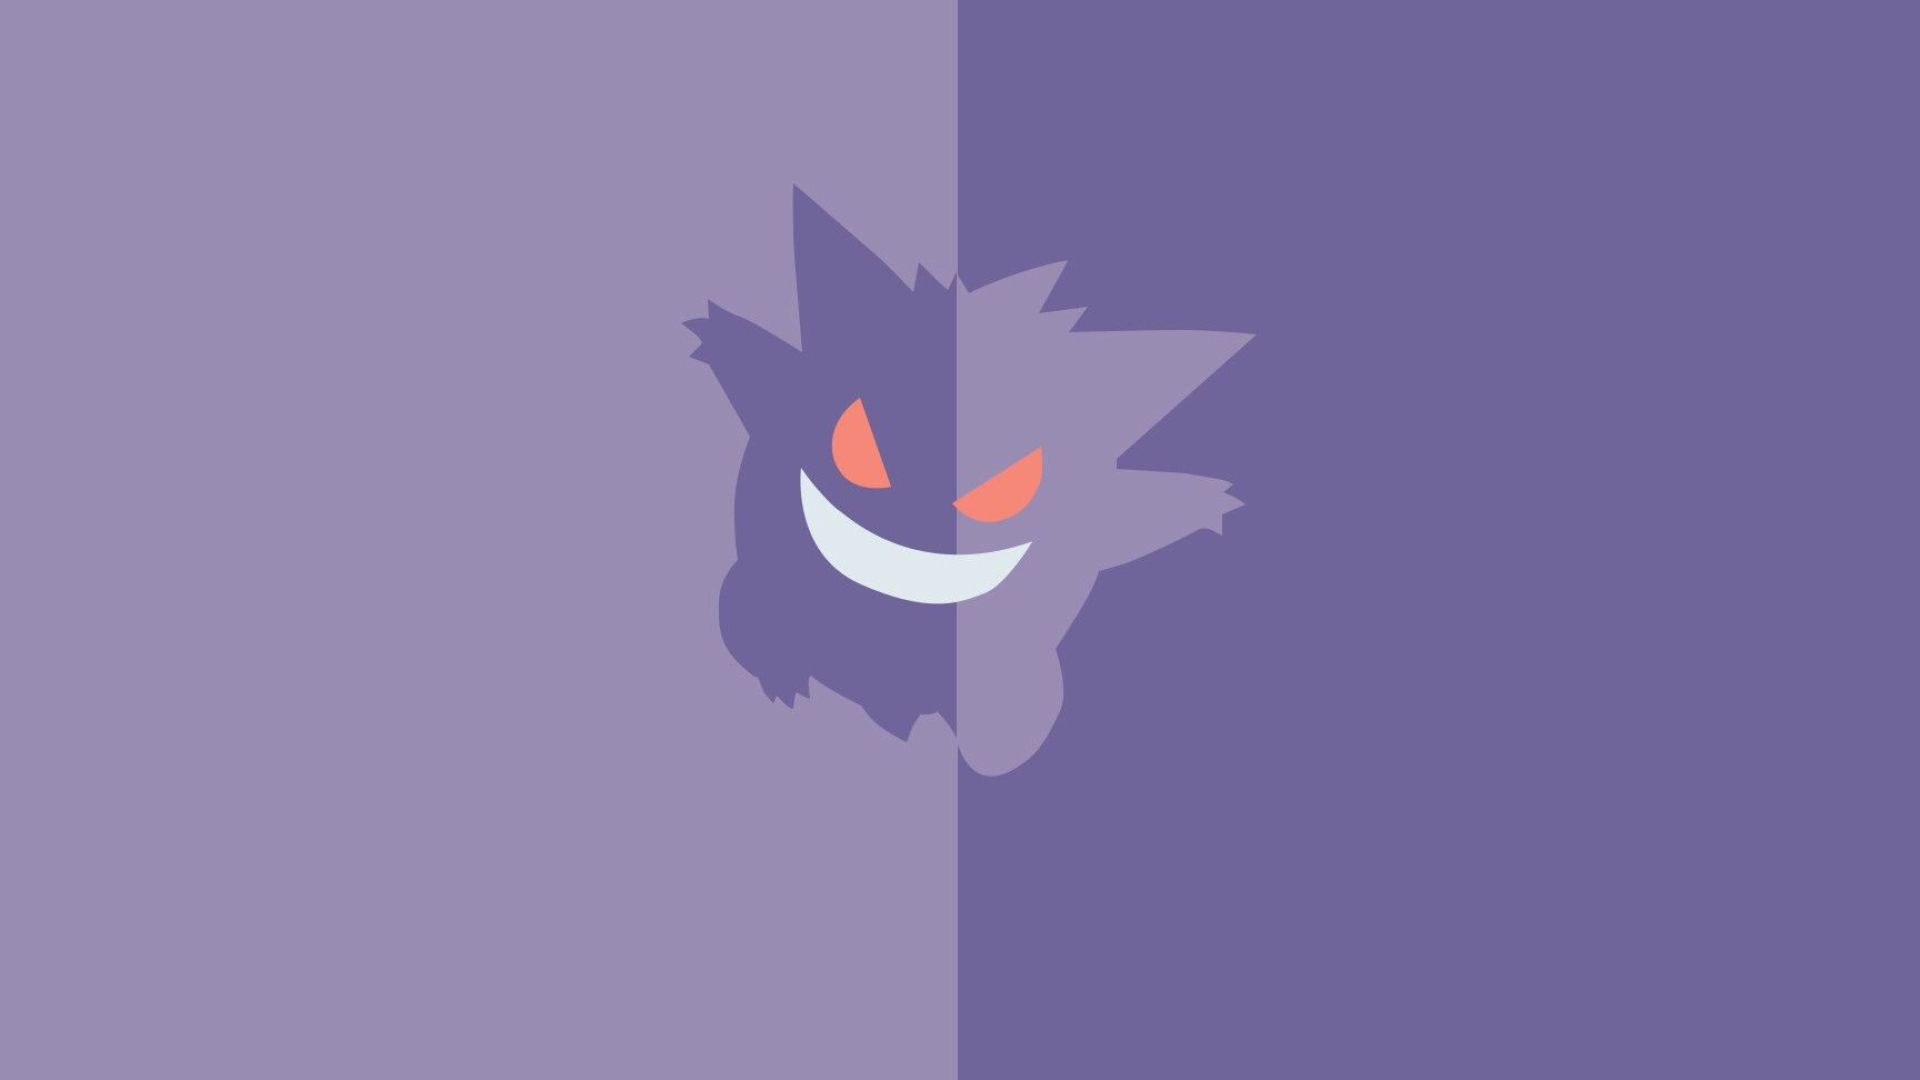 Gengar: Purple Pokemon, Fictional creature, A sinister grin and pointed ears. 1920x1080 Full HD Wallpaper.